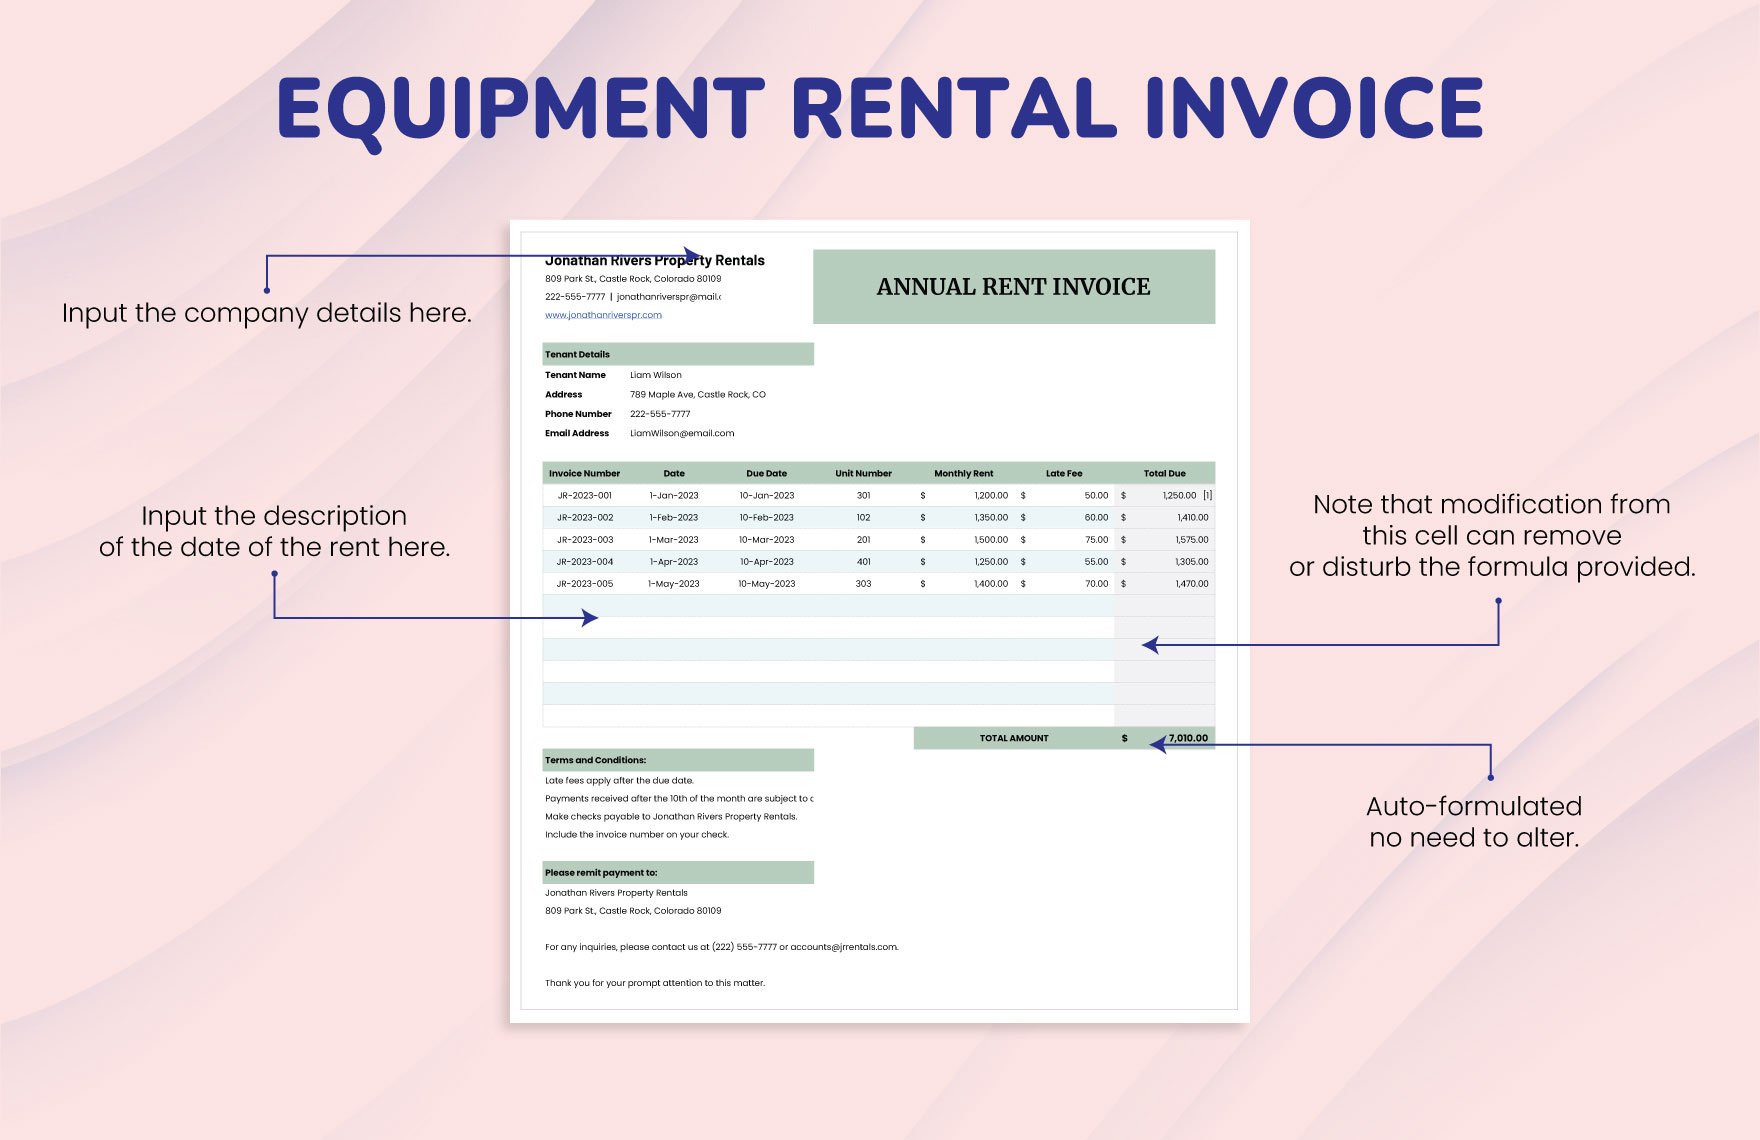 Annual Rent Invoice Template